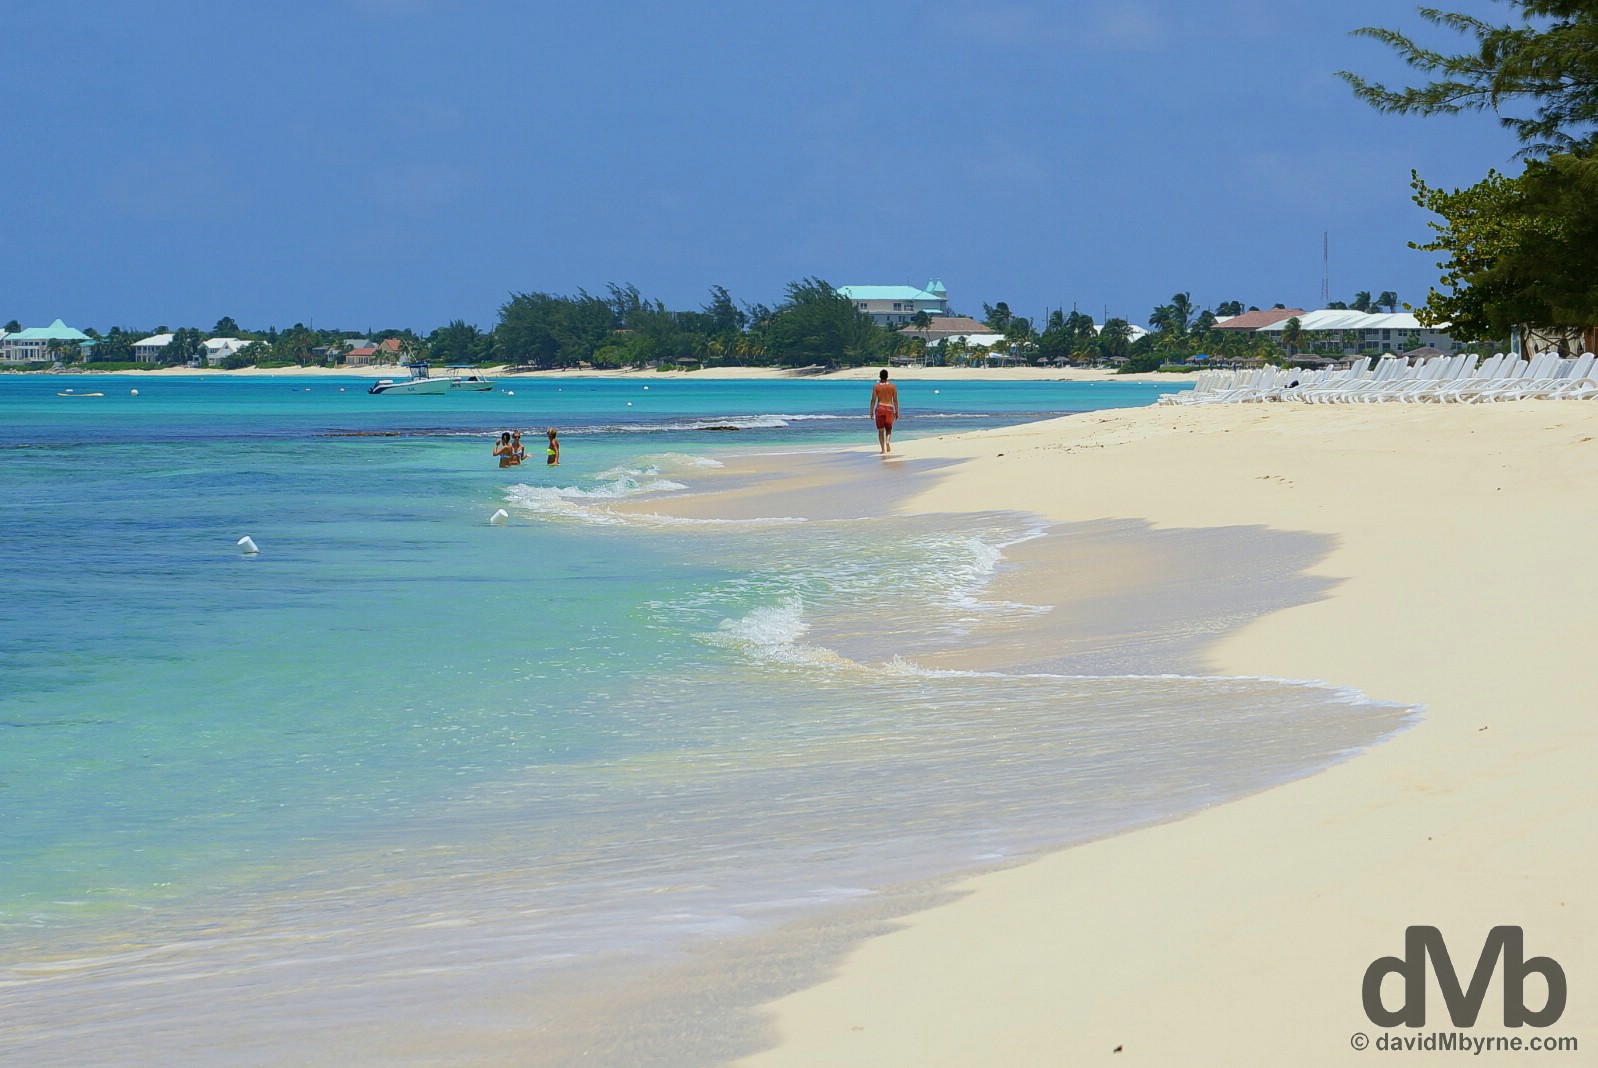 Seven Mile Beach on Grand Cayman, the Cayman Islands, Greater Antilles. May 12, 2015.